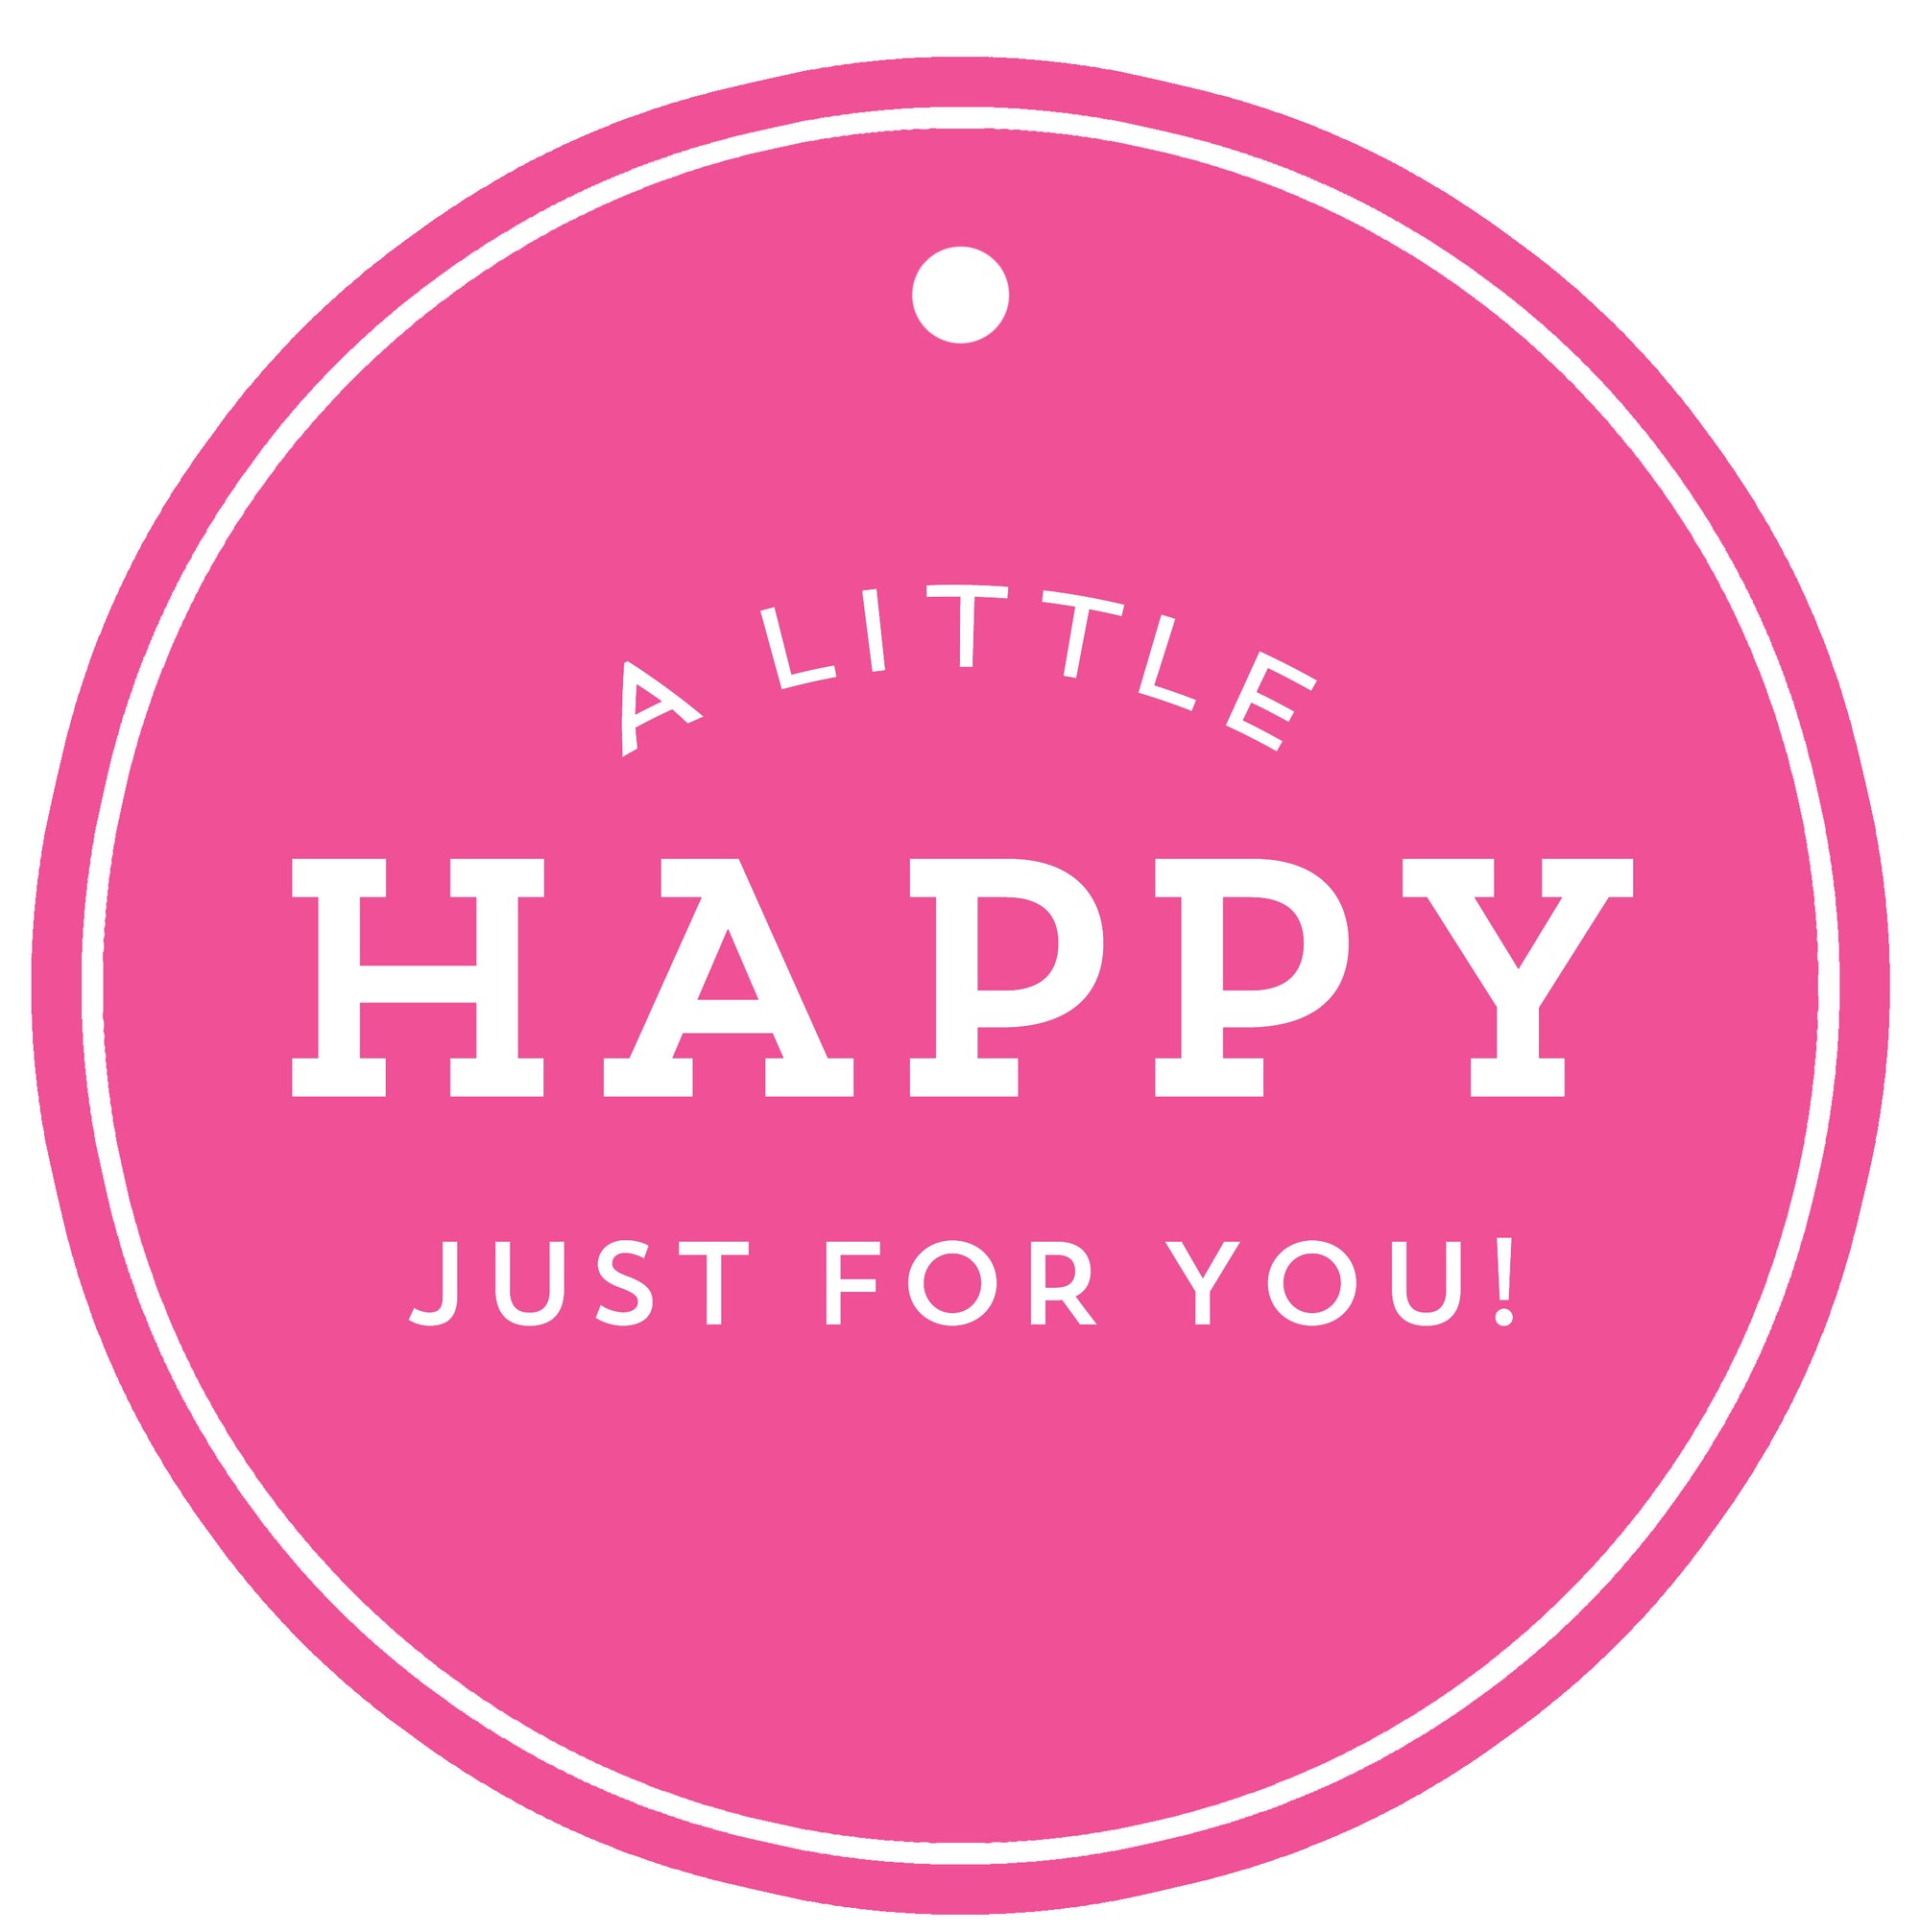 In Stock 3" Round "A Little HAPPY Just for You!"Die Cut Gift Tags |  Hot Pink